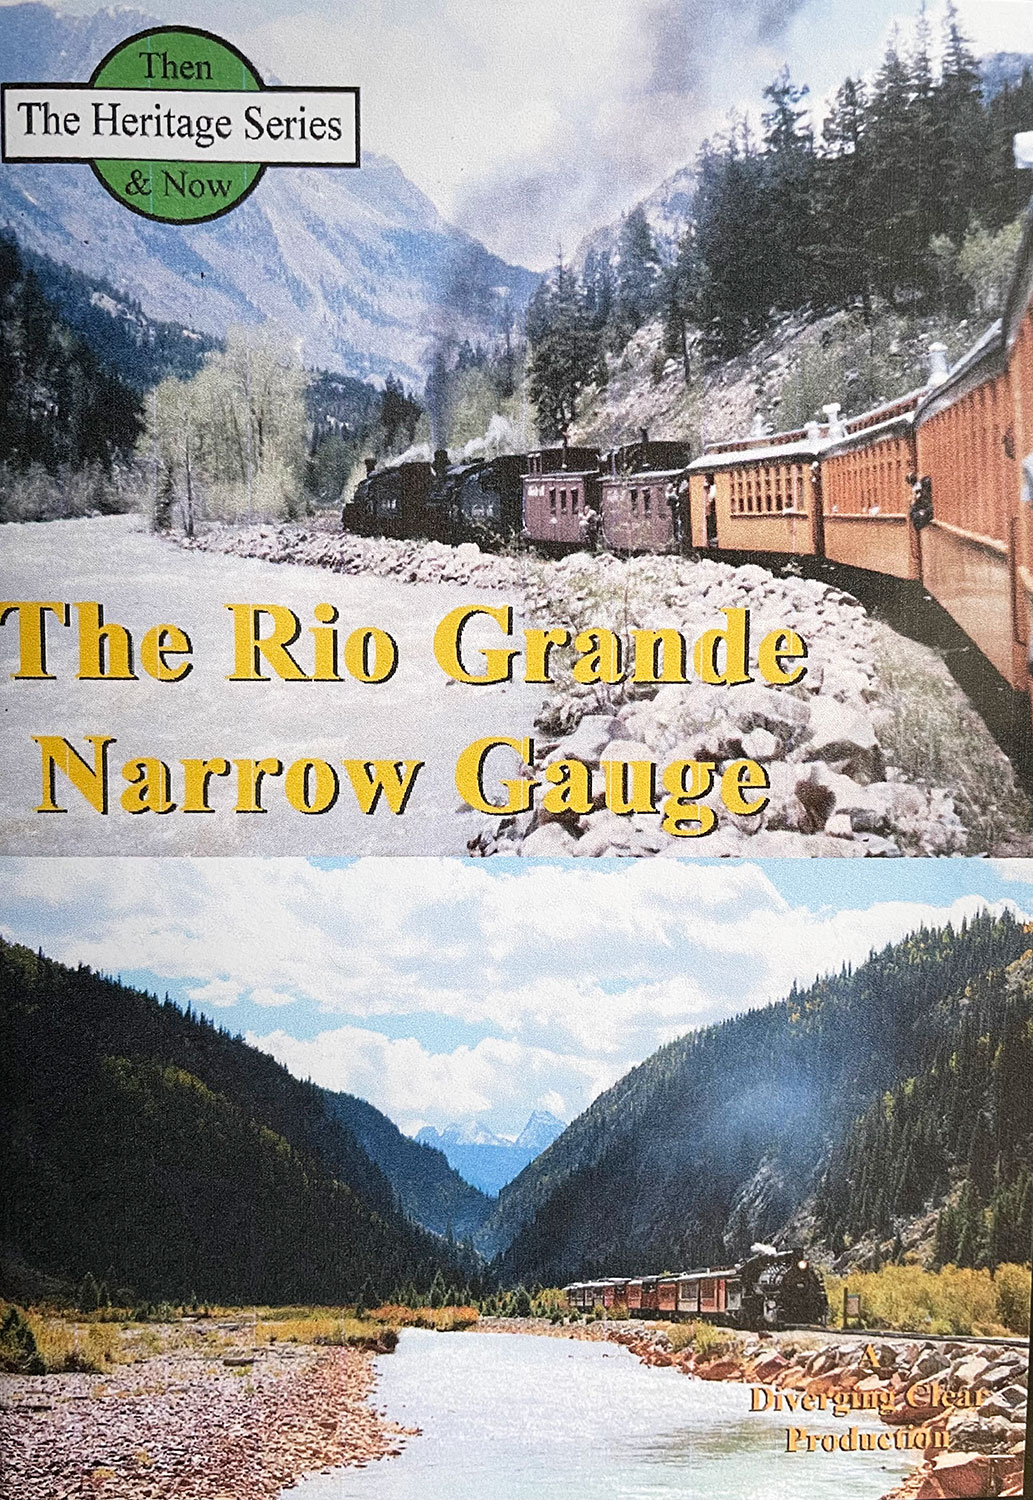 The Rio Grande Narrow Gauge Then & Now 2 Disc DVD Diverging Clear Productions DC-RGNG